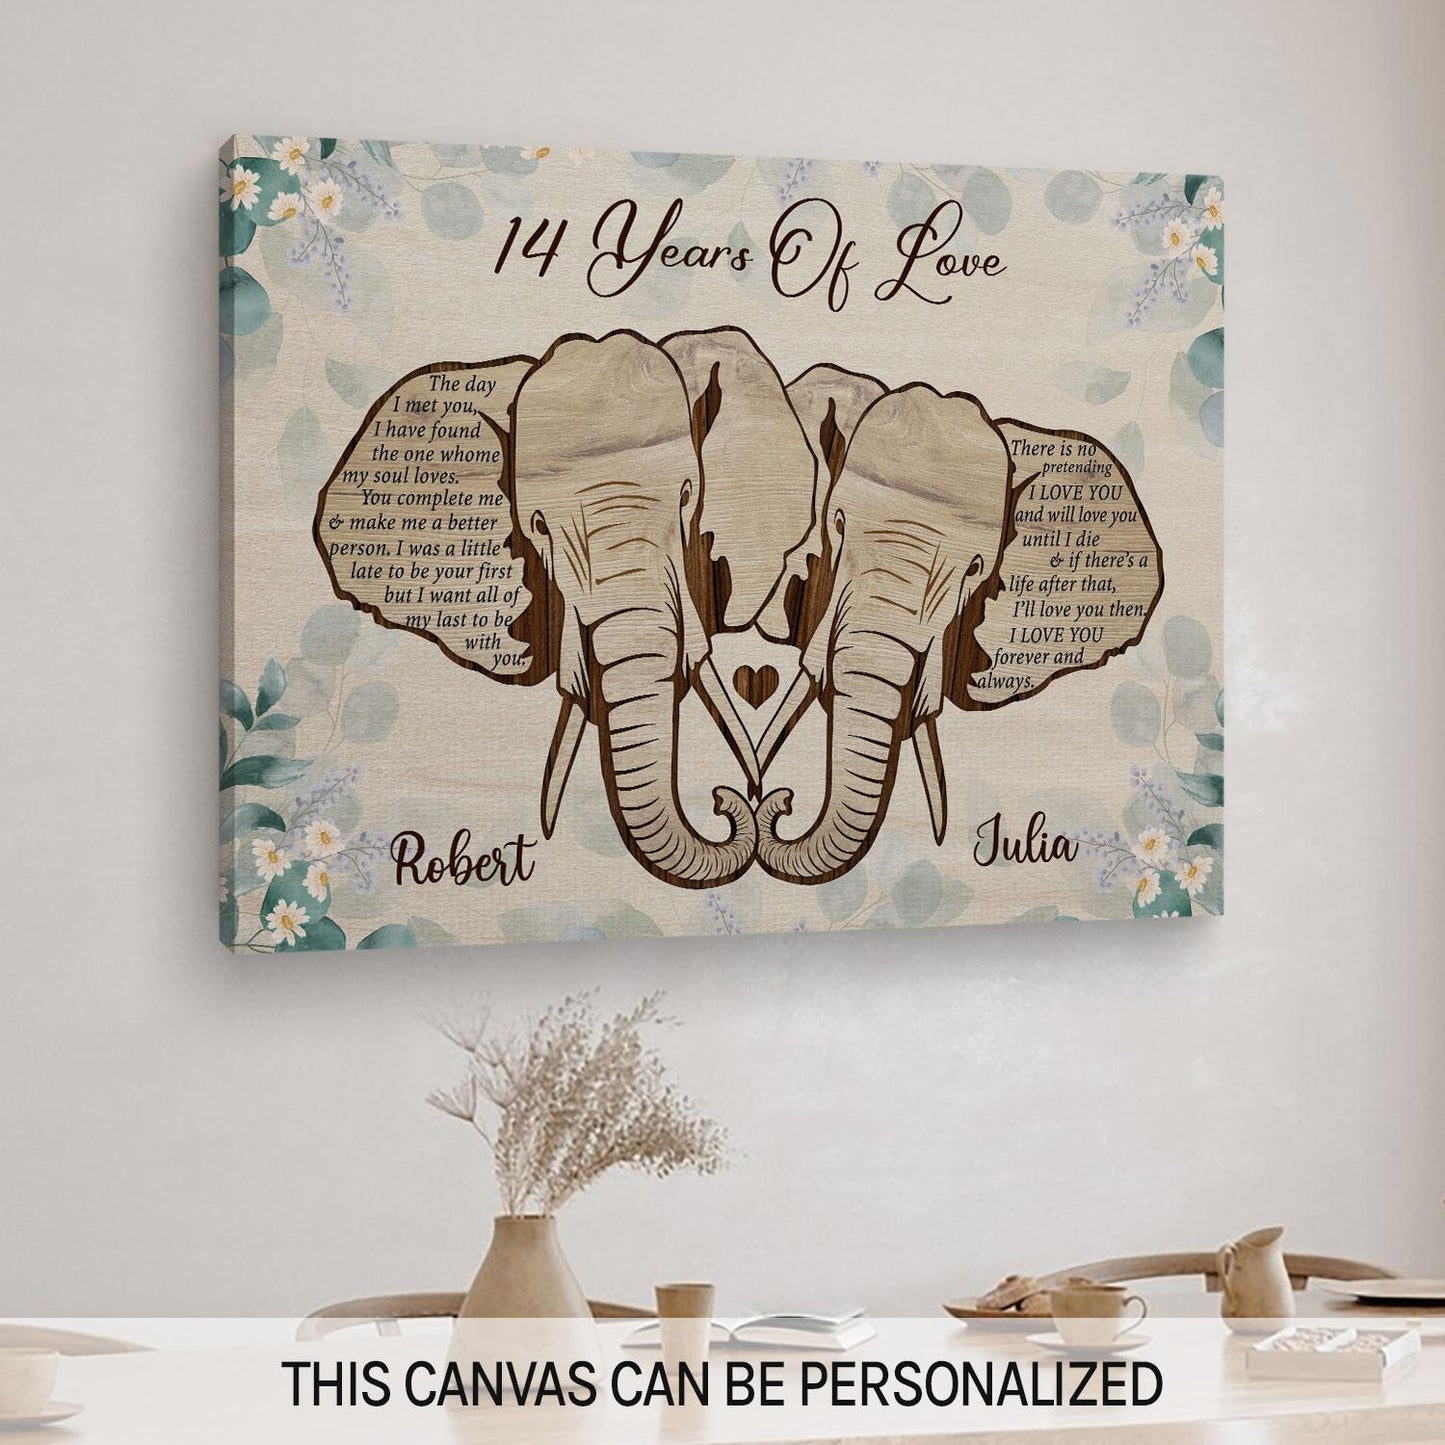 14 Years Of Love - Personalized 14 Year Anniversary gift For Husband or Wife - Custom Canvas Print - MyMindfulGifts